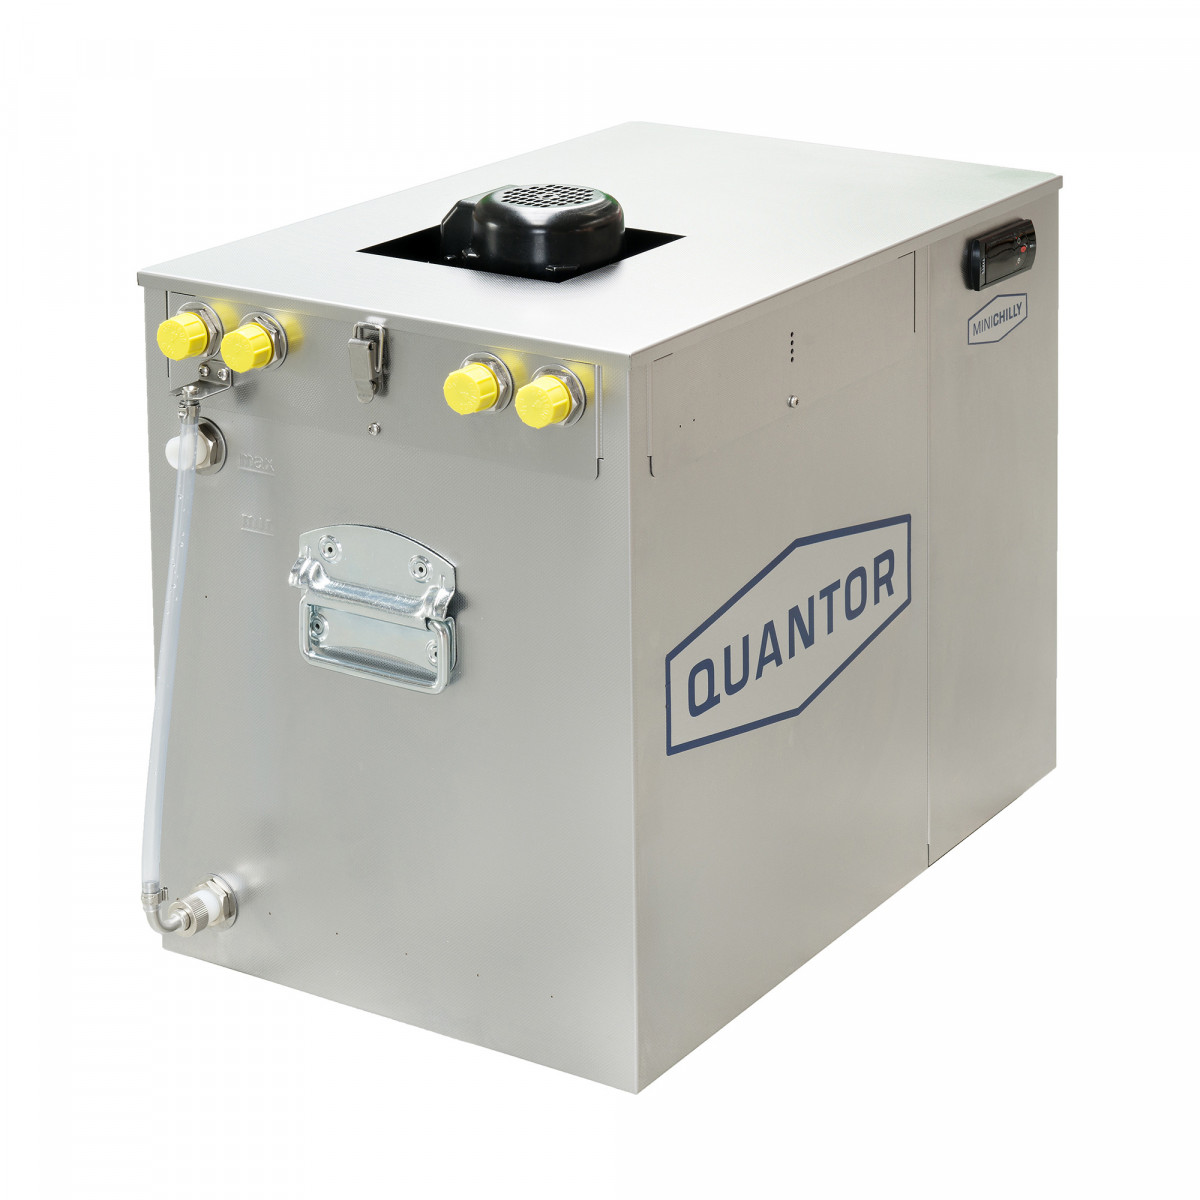  Quantor MiniChilly Glycol chiller STD 0.9 kW - 1.2 HP